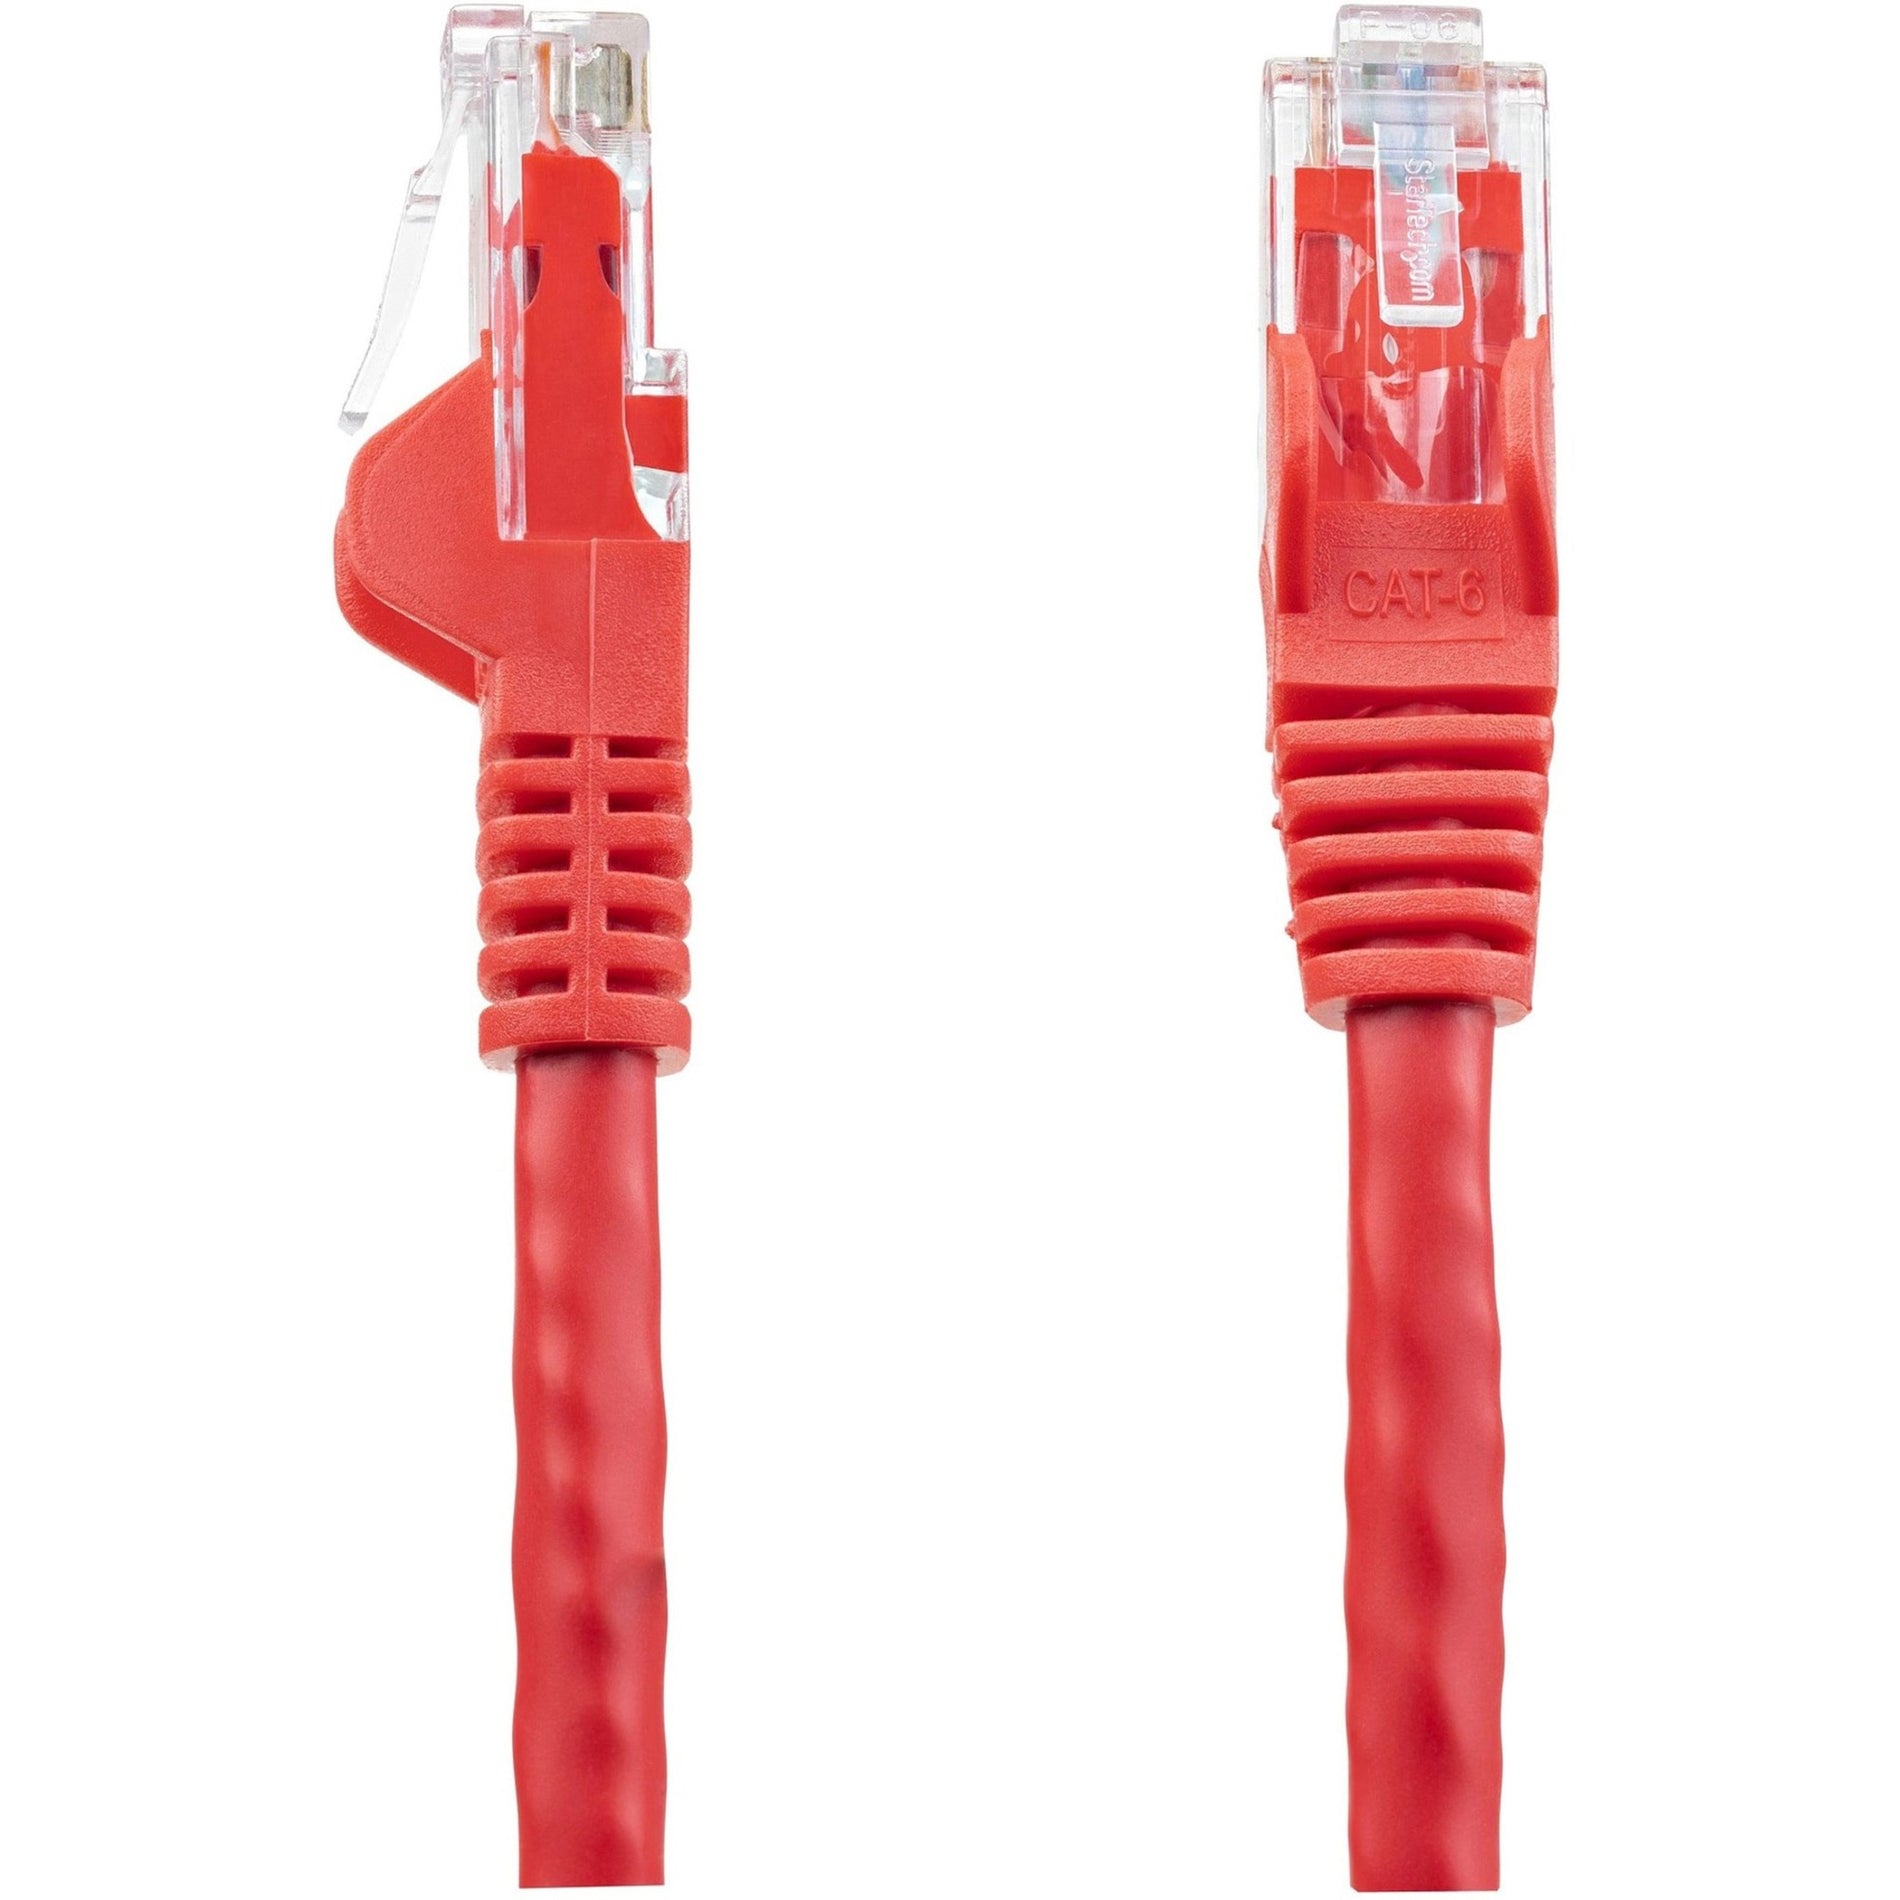 StarTech.com N6PATCH2RD Cat6 Network Cable, 2ft Red Ethernet Cable, Snagless RJ45 Connectors